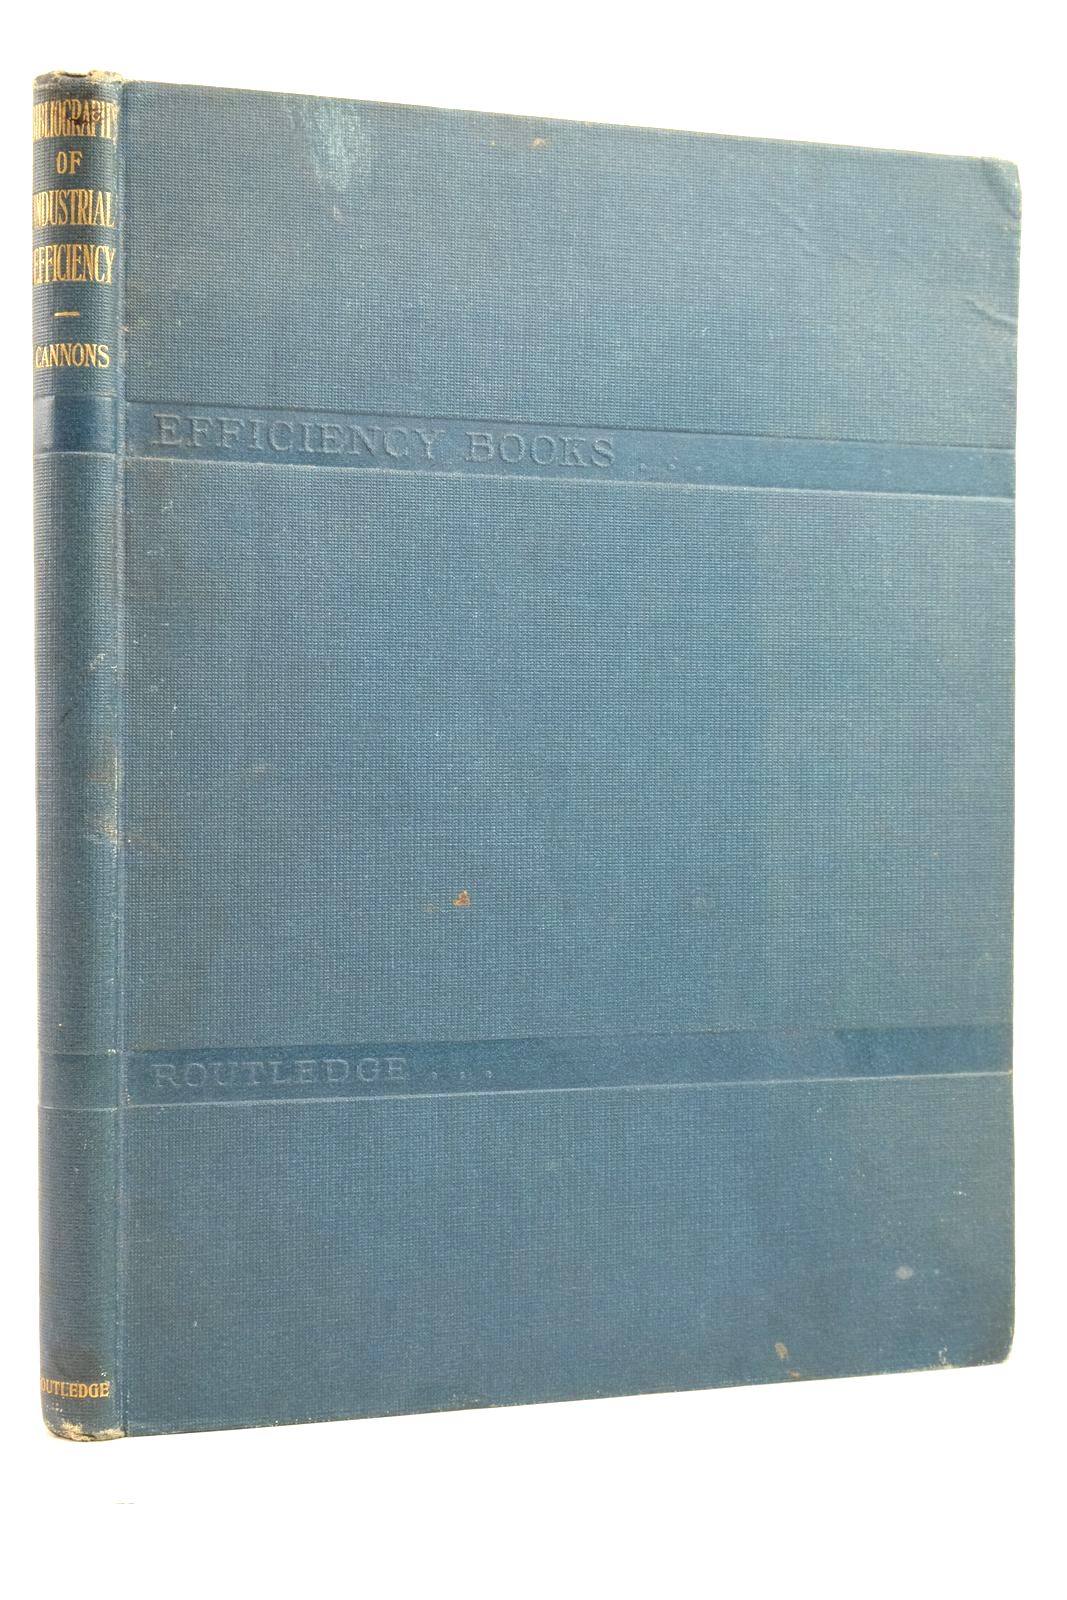 Photo of BIBLIOGRAPHY OF INDUSTRIAL EFFICIENCY AND FACTORY MANAGEMENT (BOOKS, MAGAZINE ARTICLES, ETC.) written by Canons, H.G.T. published by George Routledge &amp; Sons Ltd. (STOCK CODE: 2136072)  for sale by Stella & Rose's Books